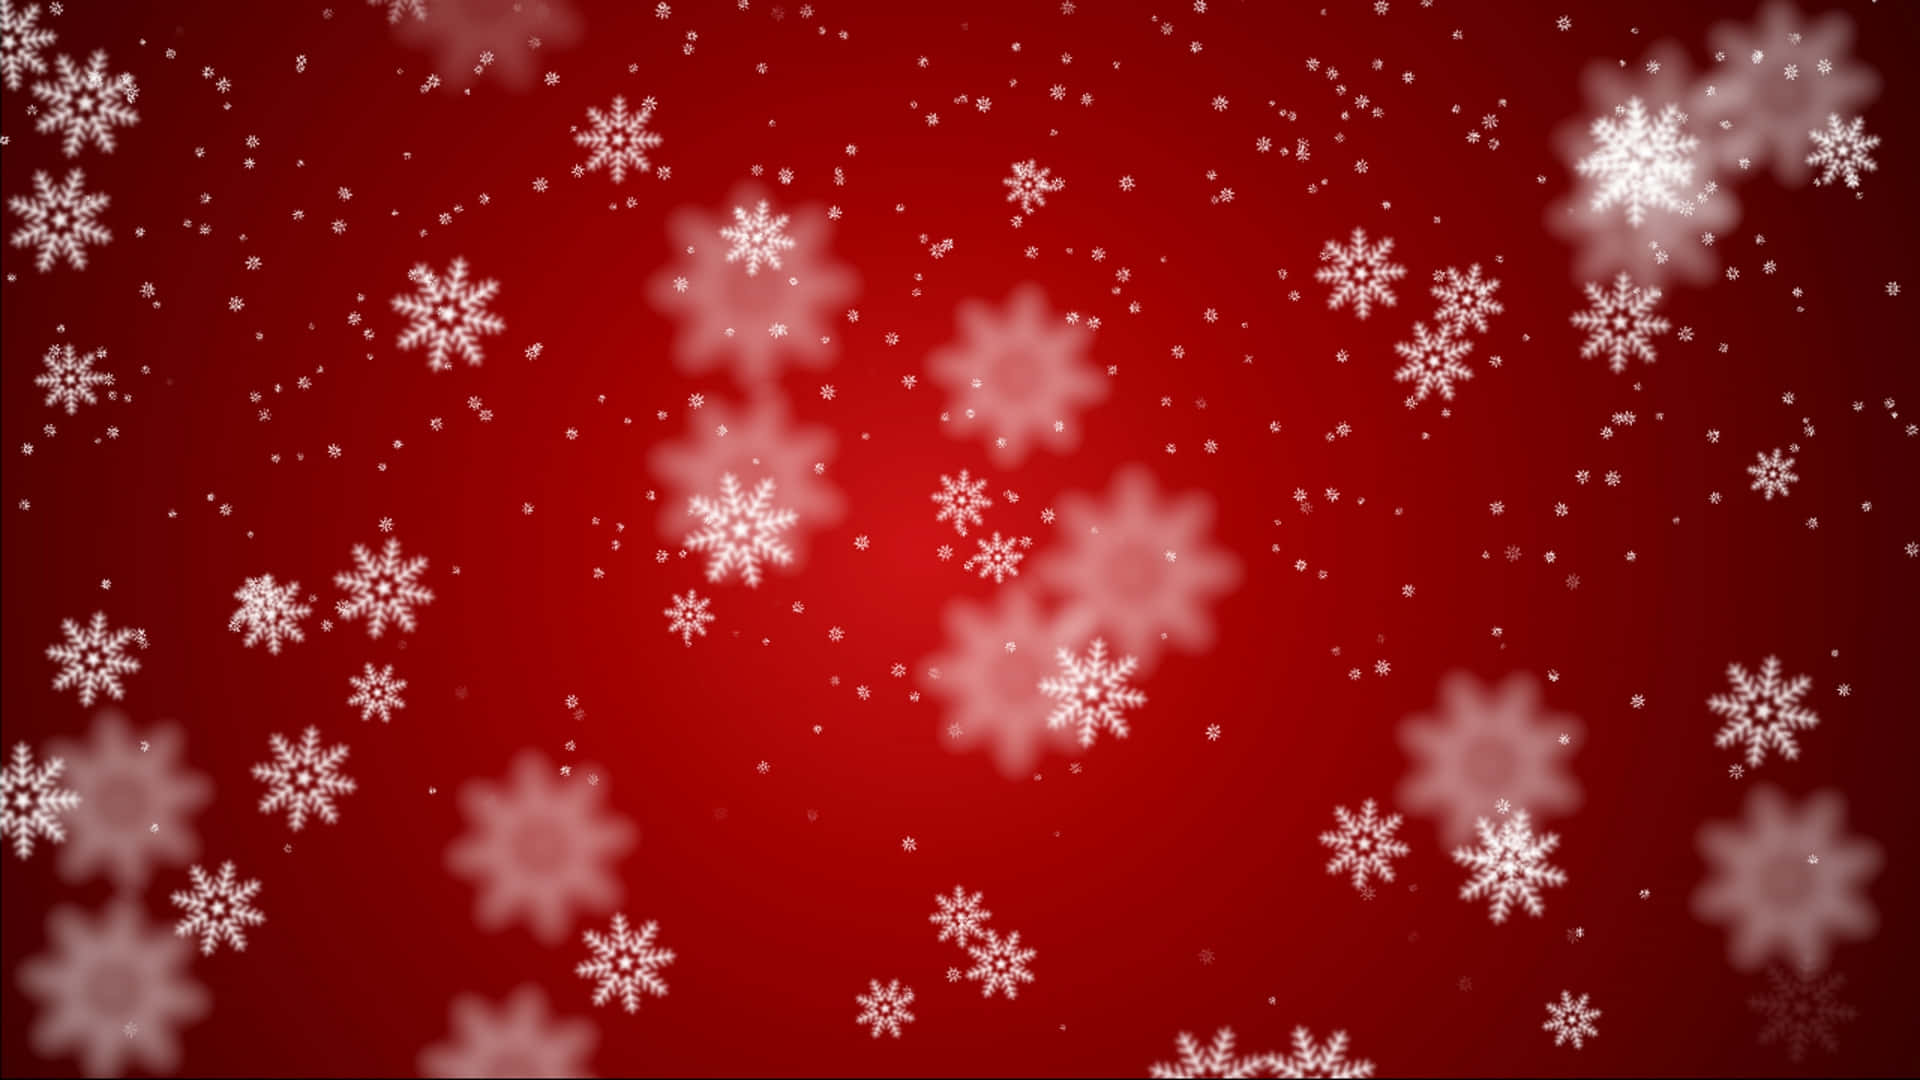 Brighten your Holidays with a Red Christmas Wallpaper